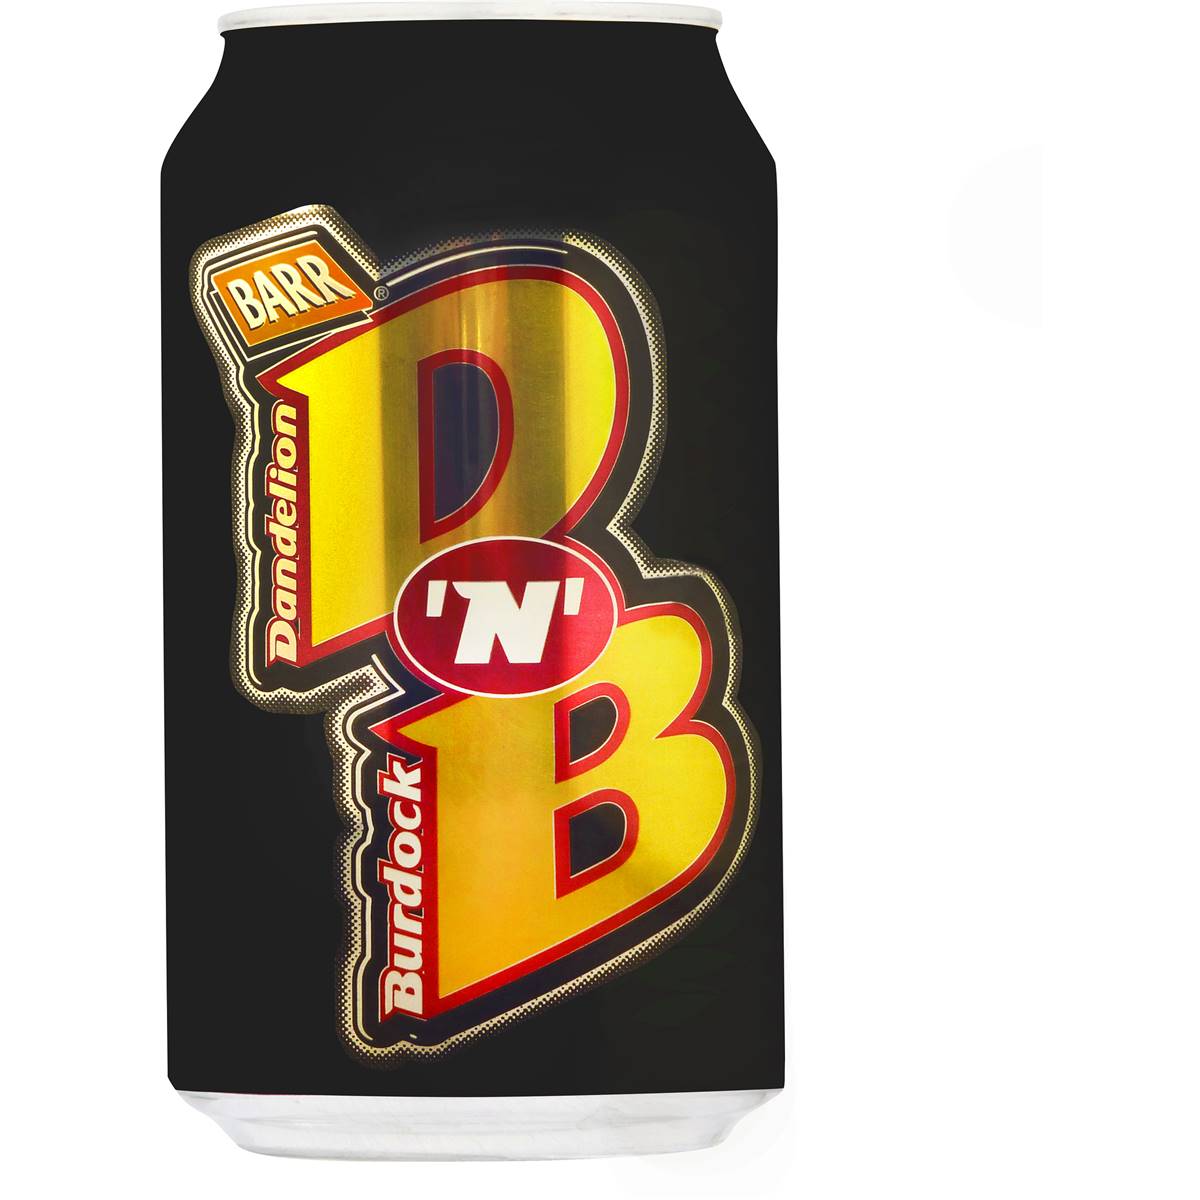 Calories in Barrs Dandelion And Burdock Can